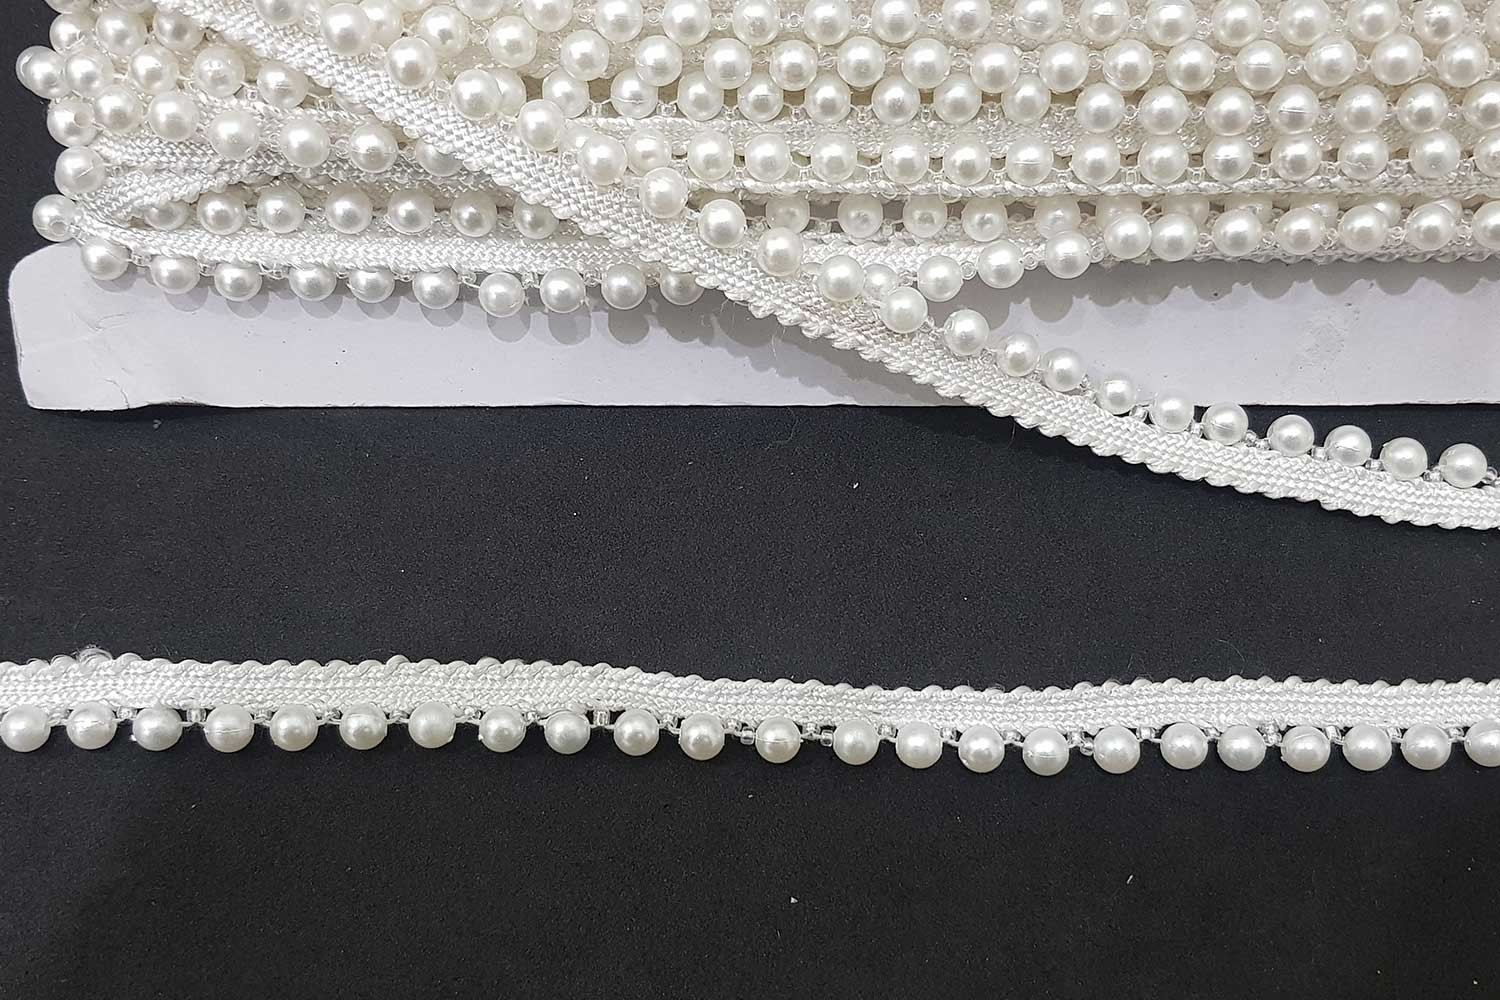 Off-white Color Cutwork Design Pearl Lace - Designers Need